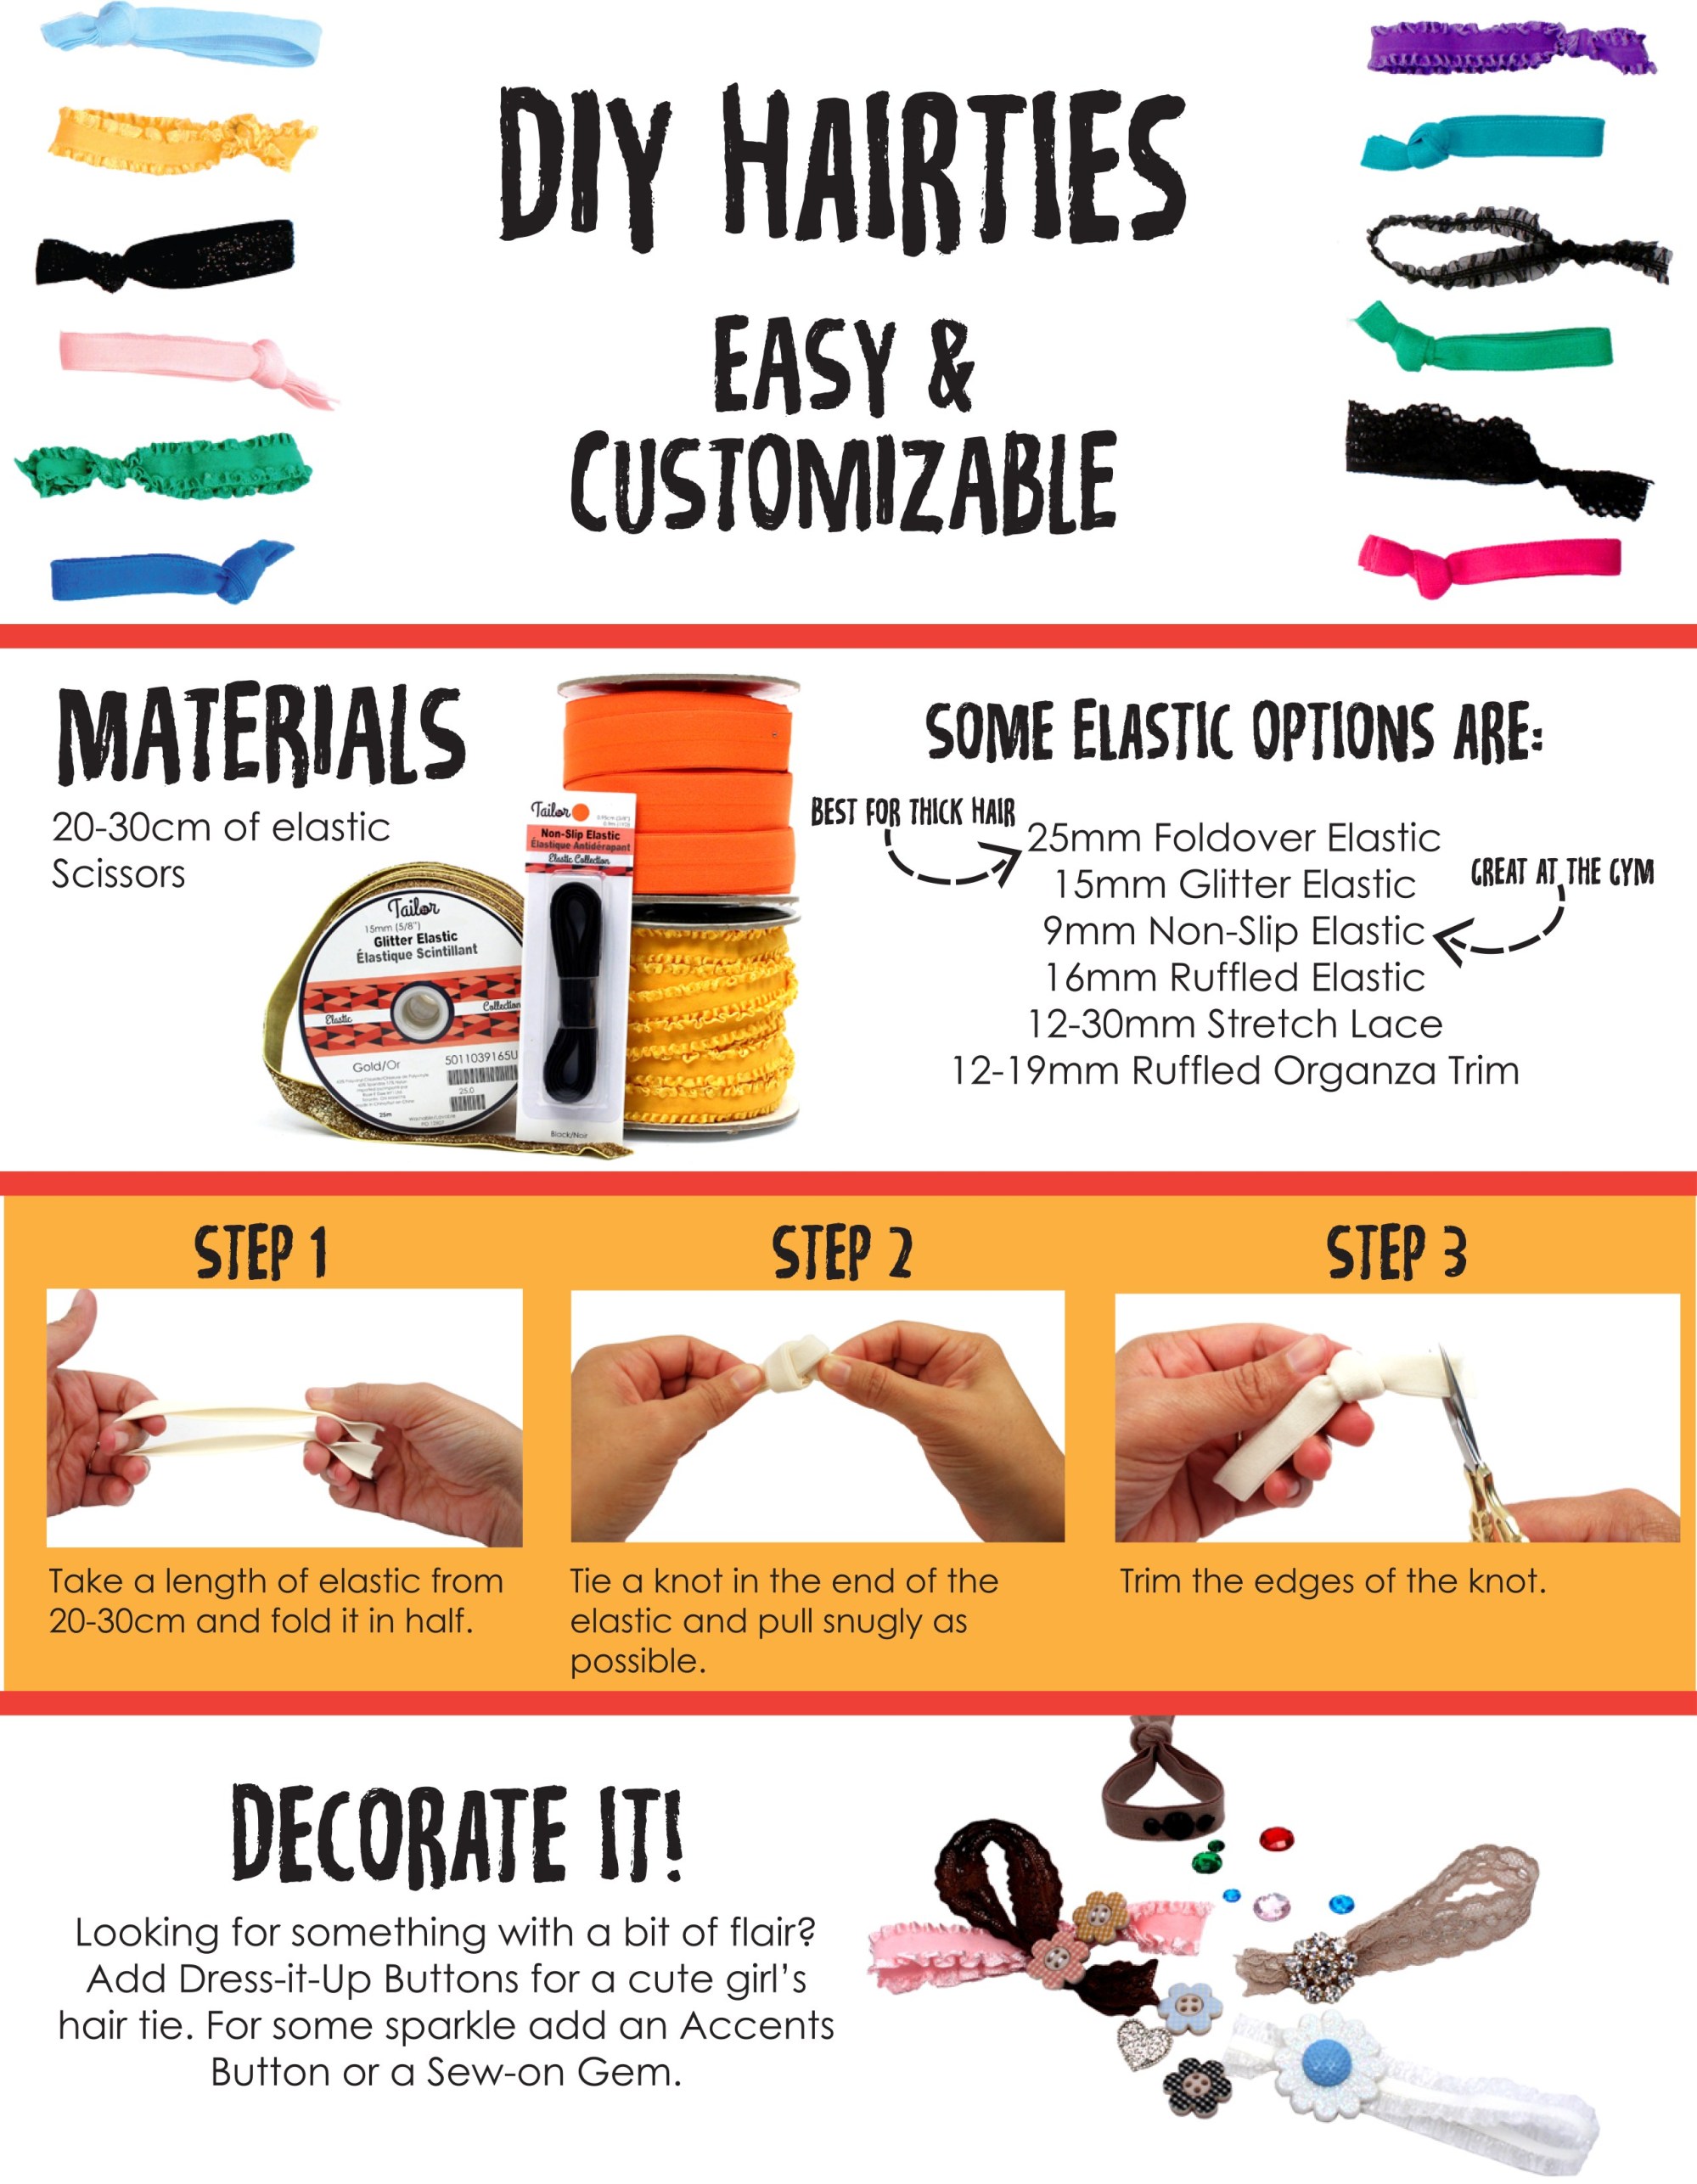 Materials & steps to create easy customizable hairties